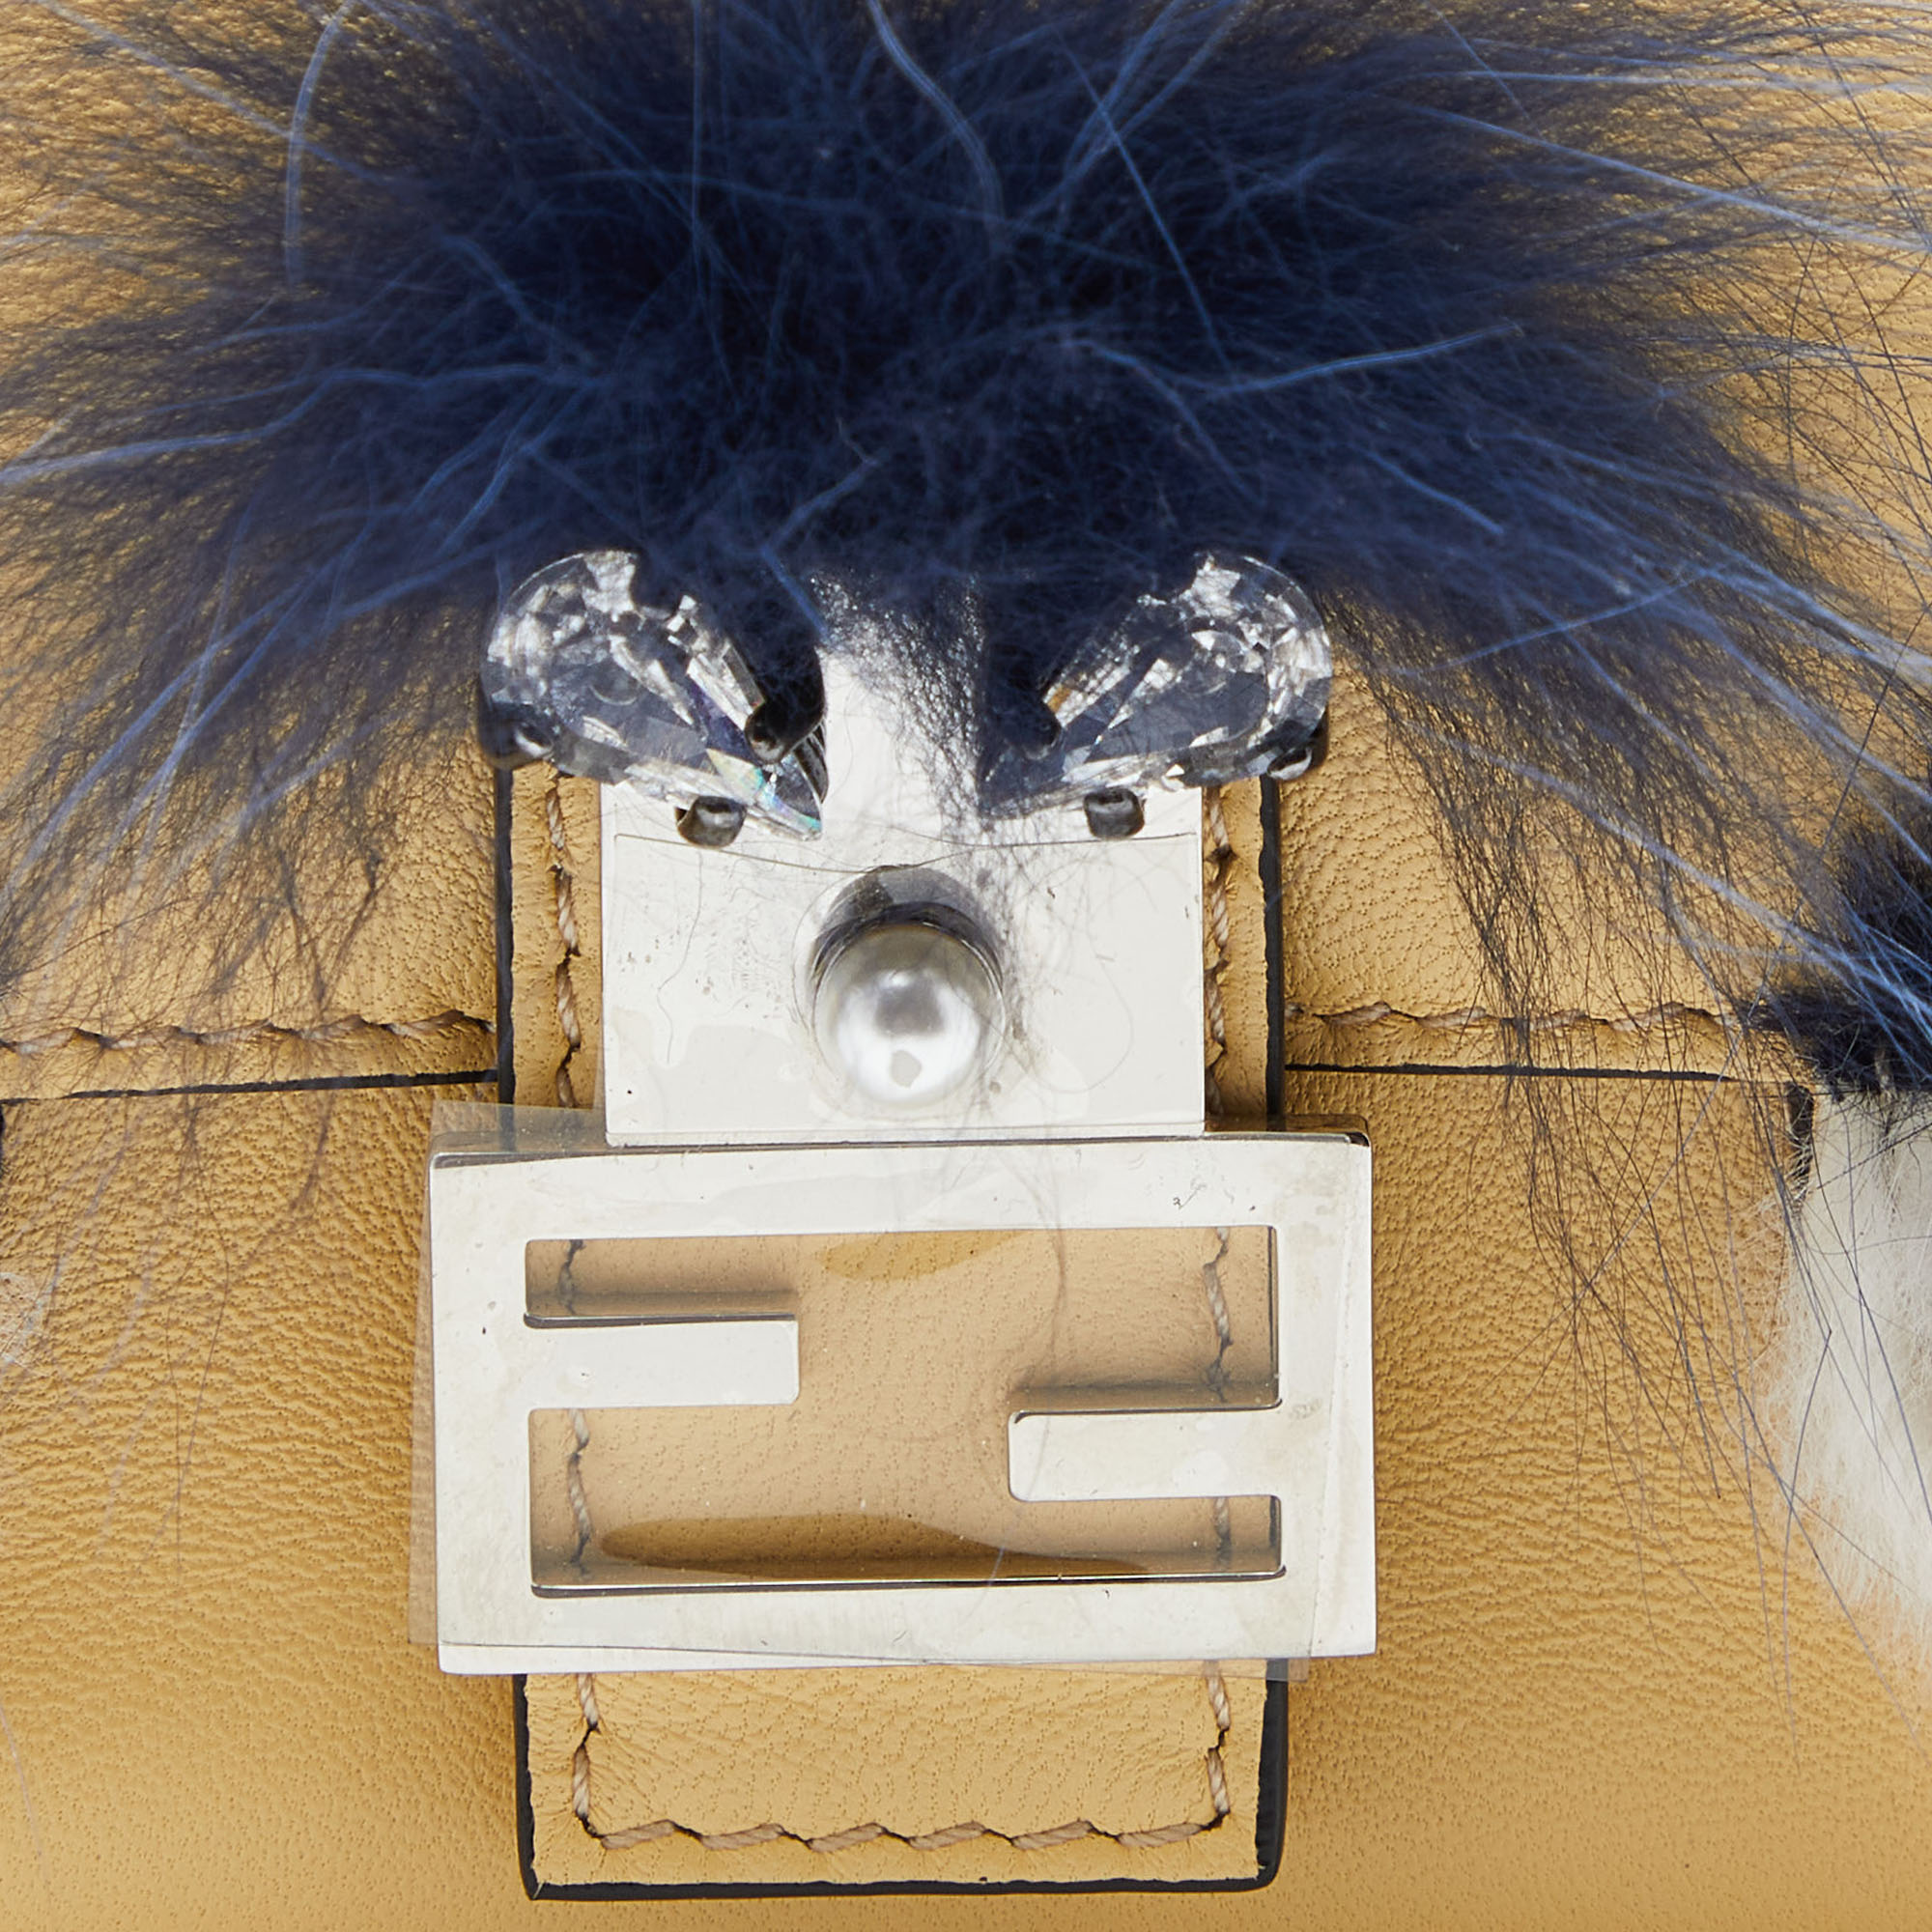 Fendi Yellow Leather And Fur Micro Monster Baguette Bag